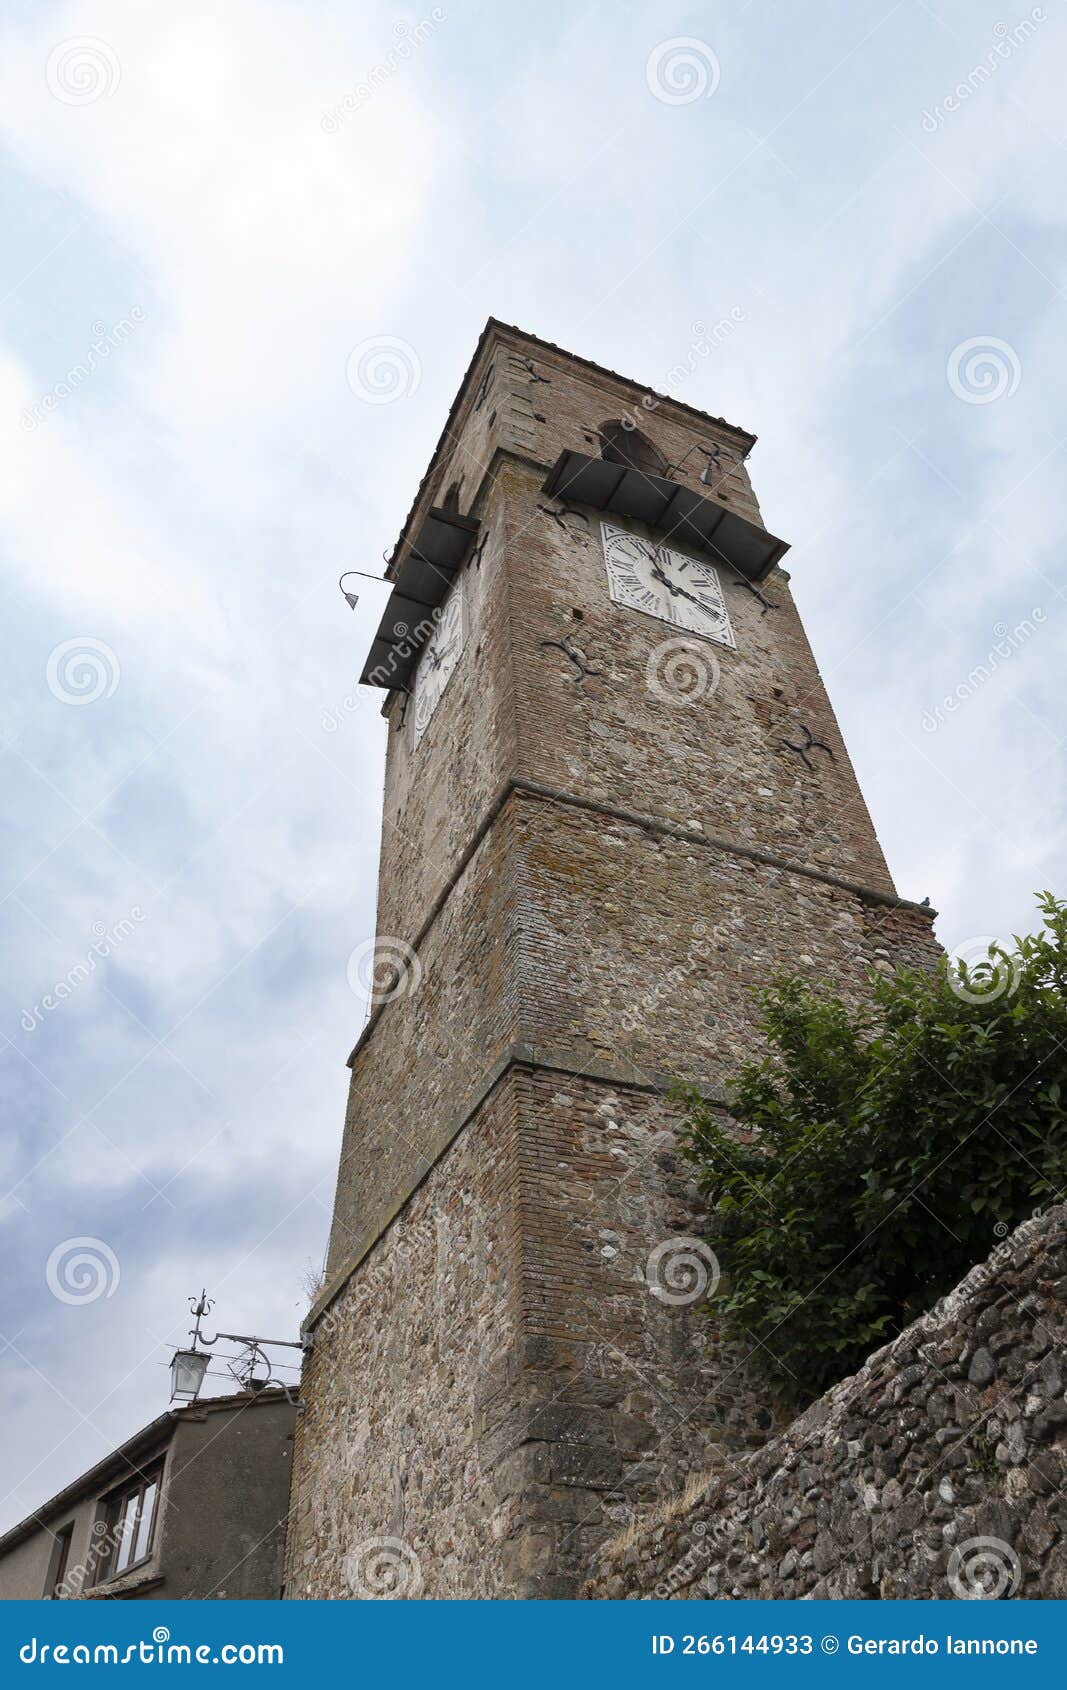 anghiari`s iconic clock tower: a timeless beauty